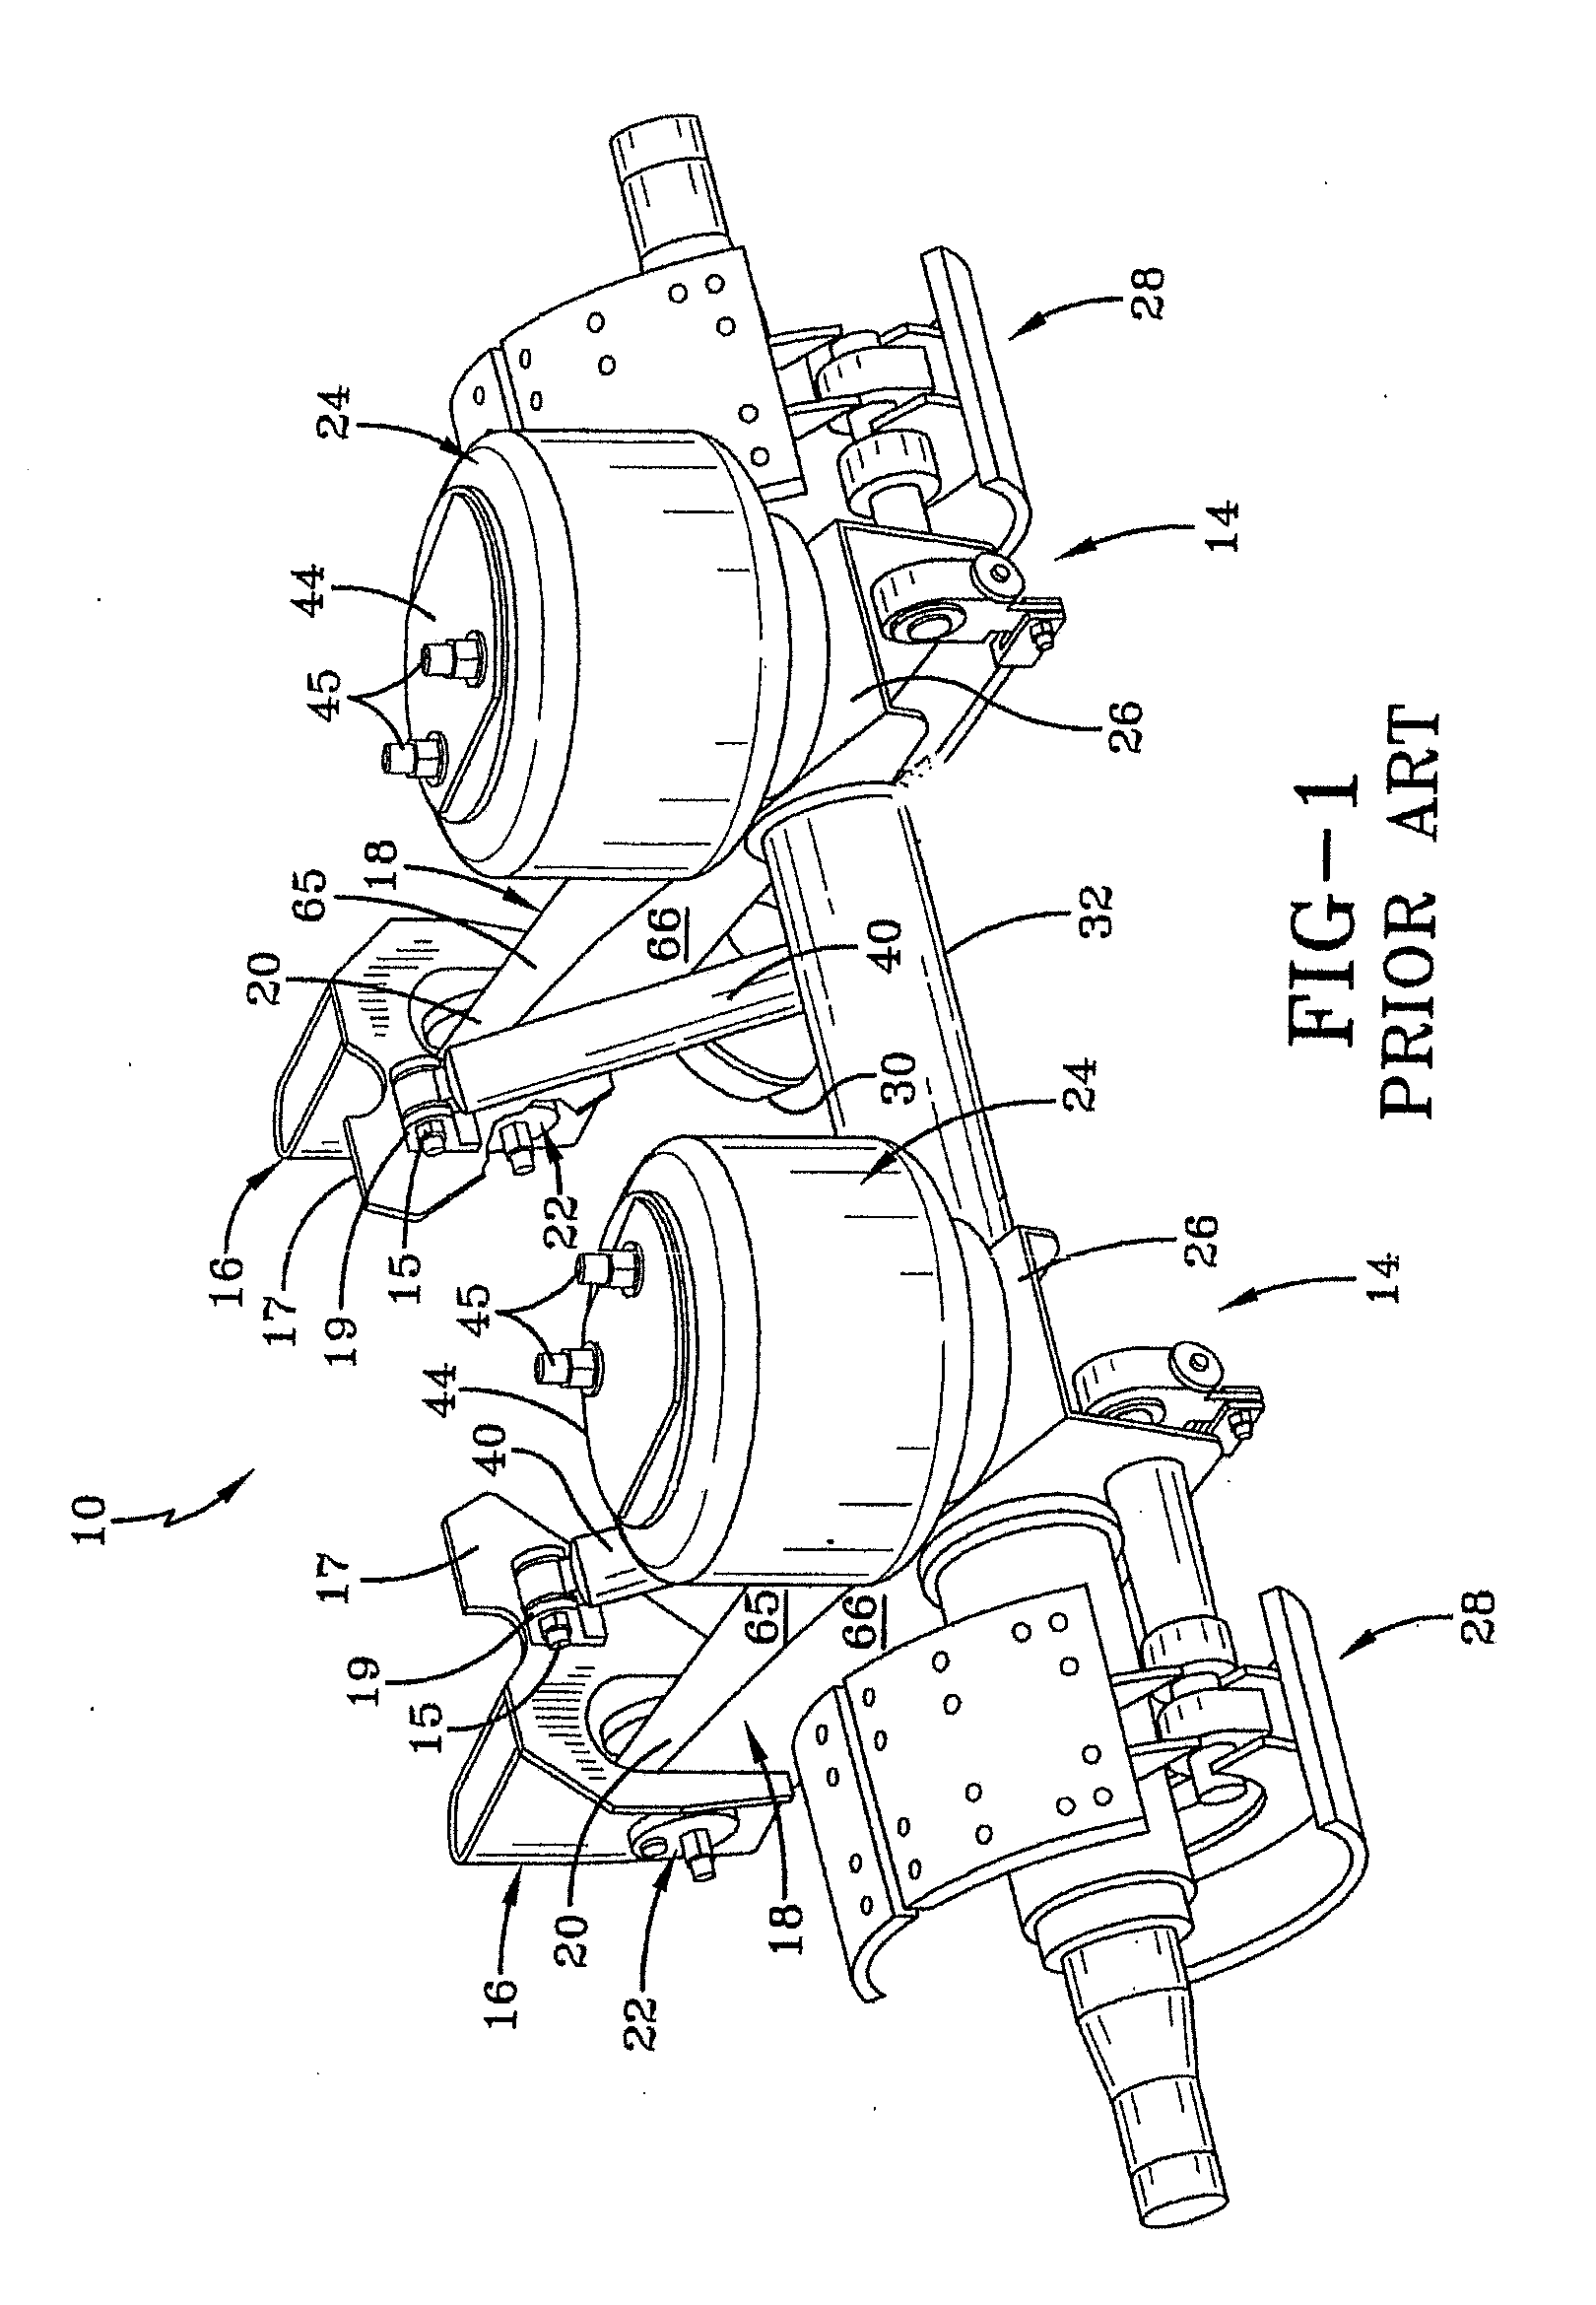 Air spring piston for a heavy-duty vehicle